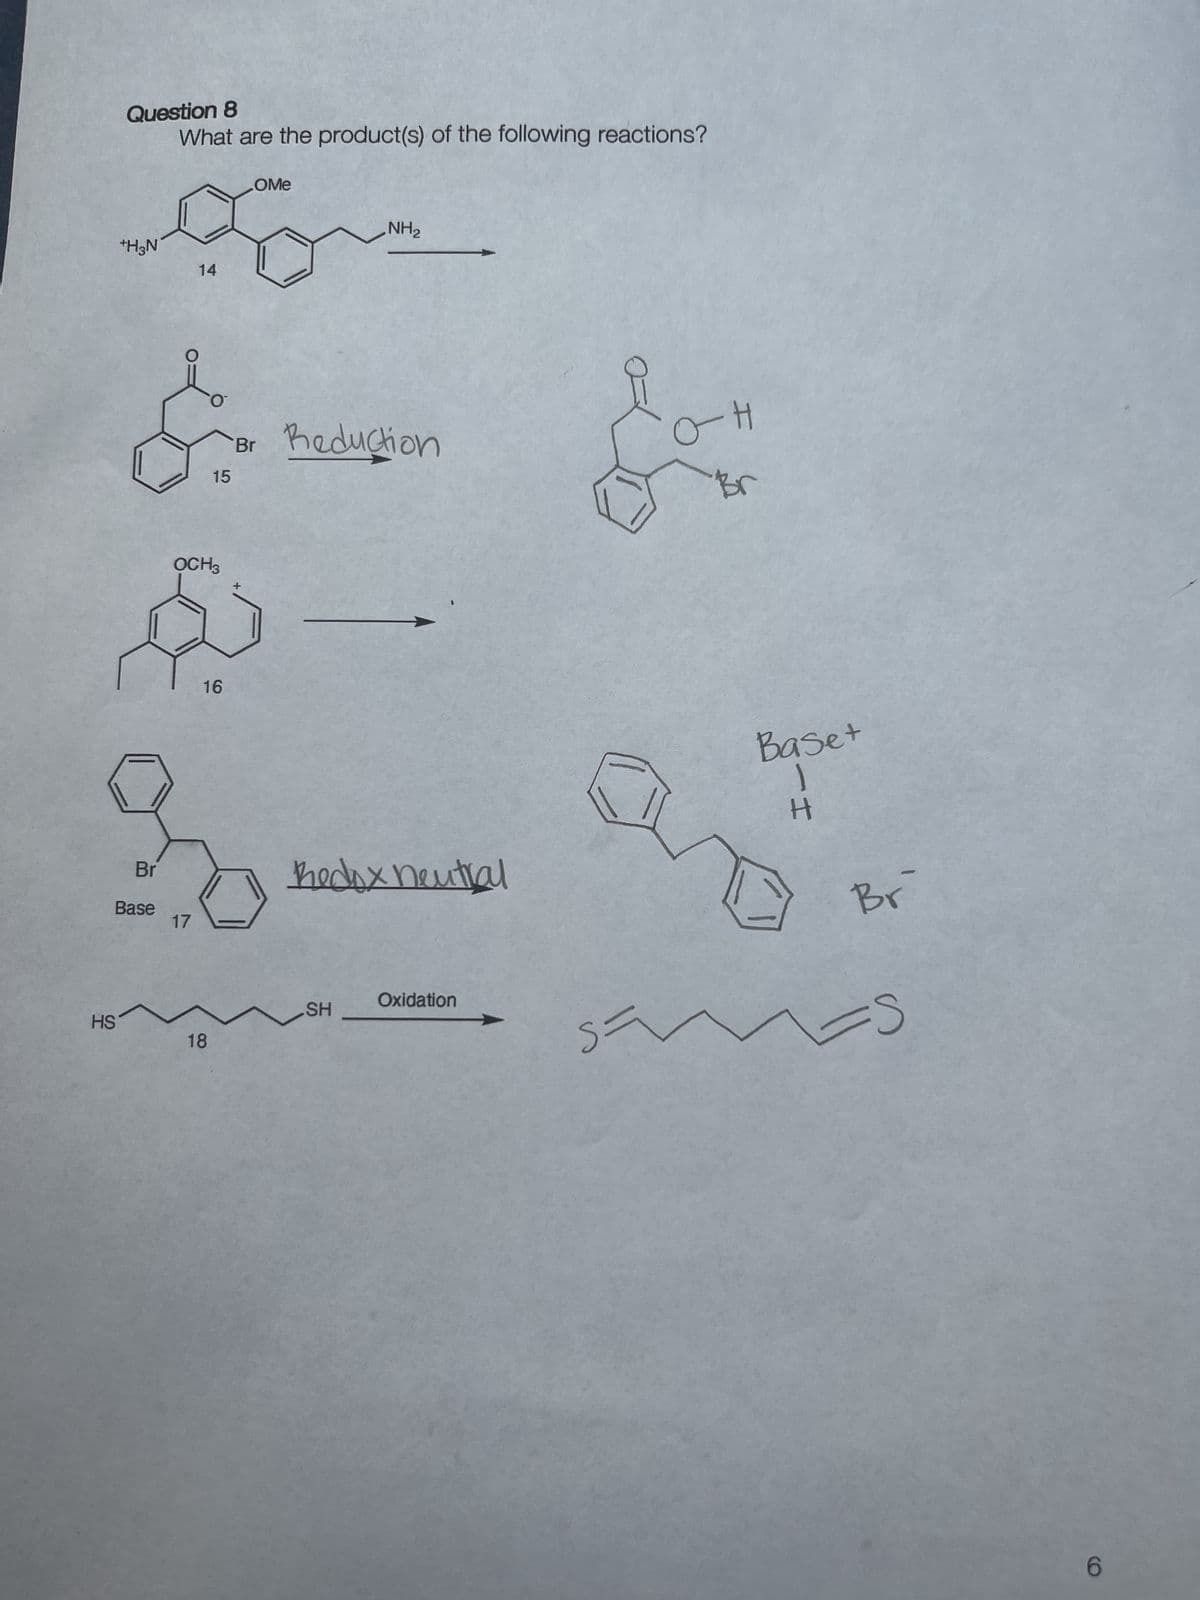 HS
Question 8
What are the product(s) of the following reactions?
+H3N
Br
Base
14
17
ỌCH3
15
16
18
OME
NH₂
"Br Reduction
Redox neutral
SH
Oxidation
O
S=
o-H
Br
~
Baset
1
H
Br
S
6